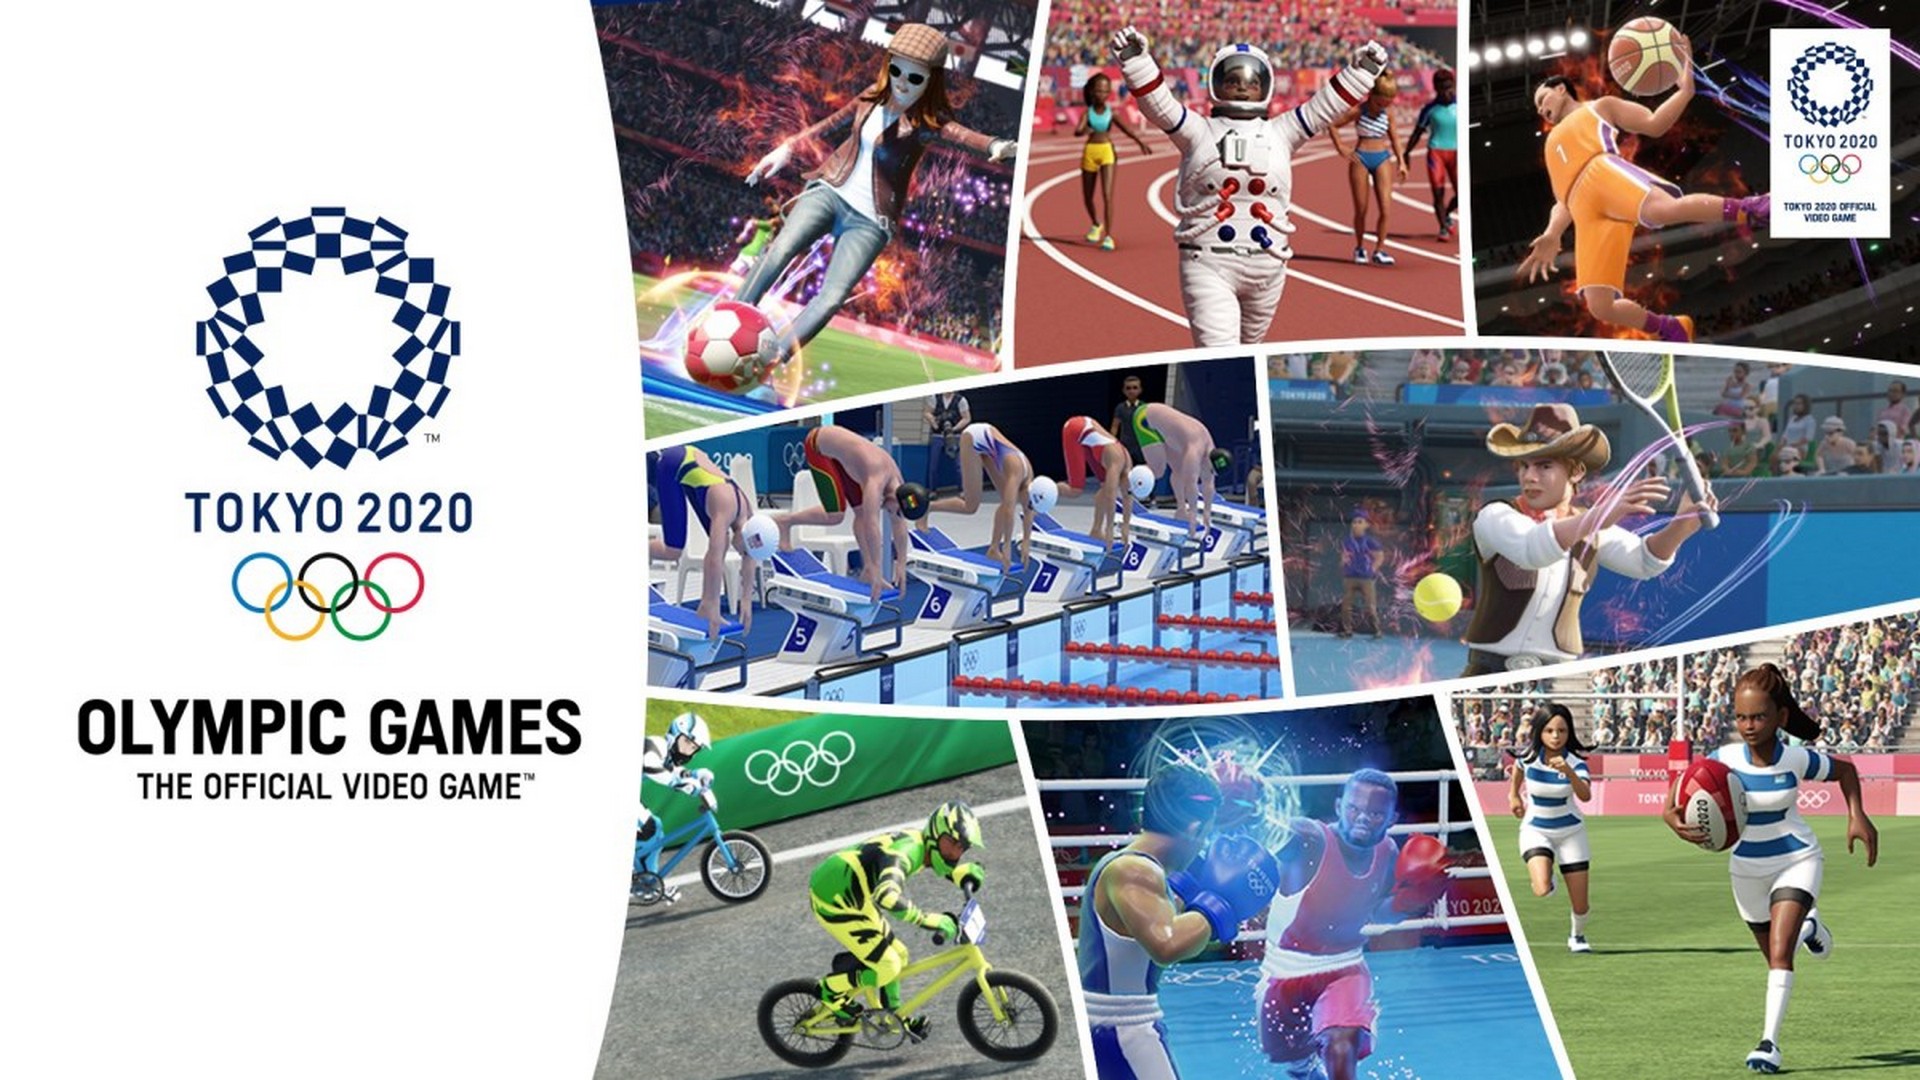 Bring The Olympic Games Home With Olympic Games Tokyo 2020 – The Official Video Game